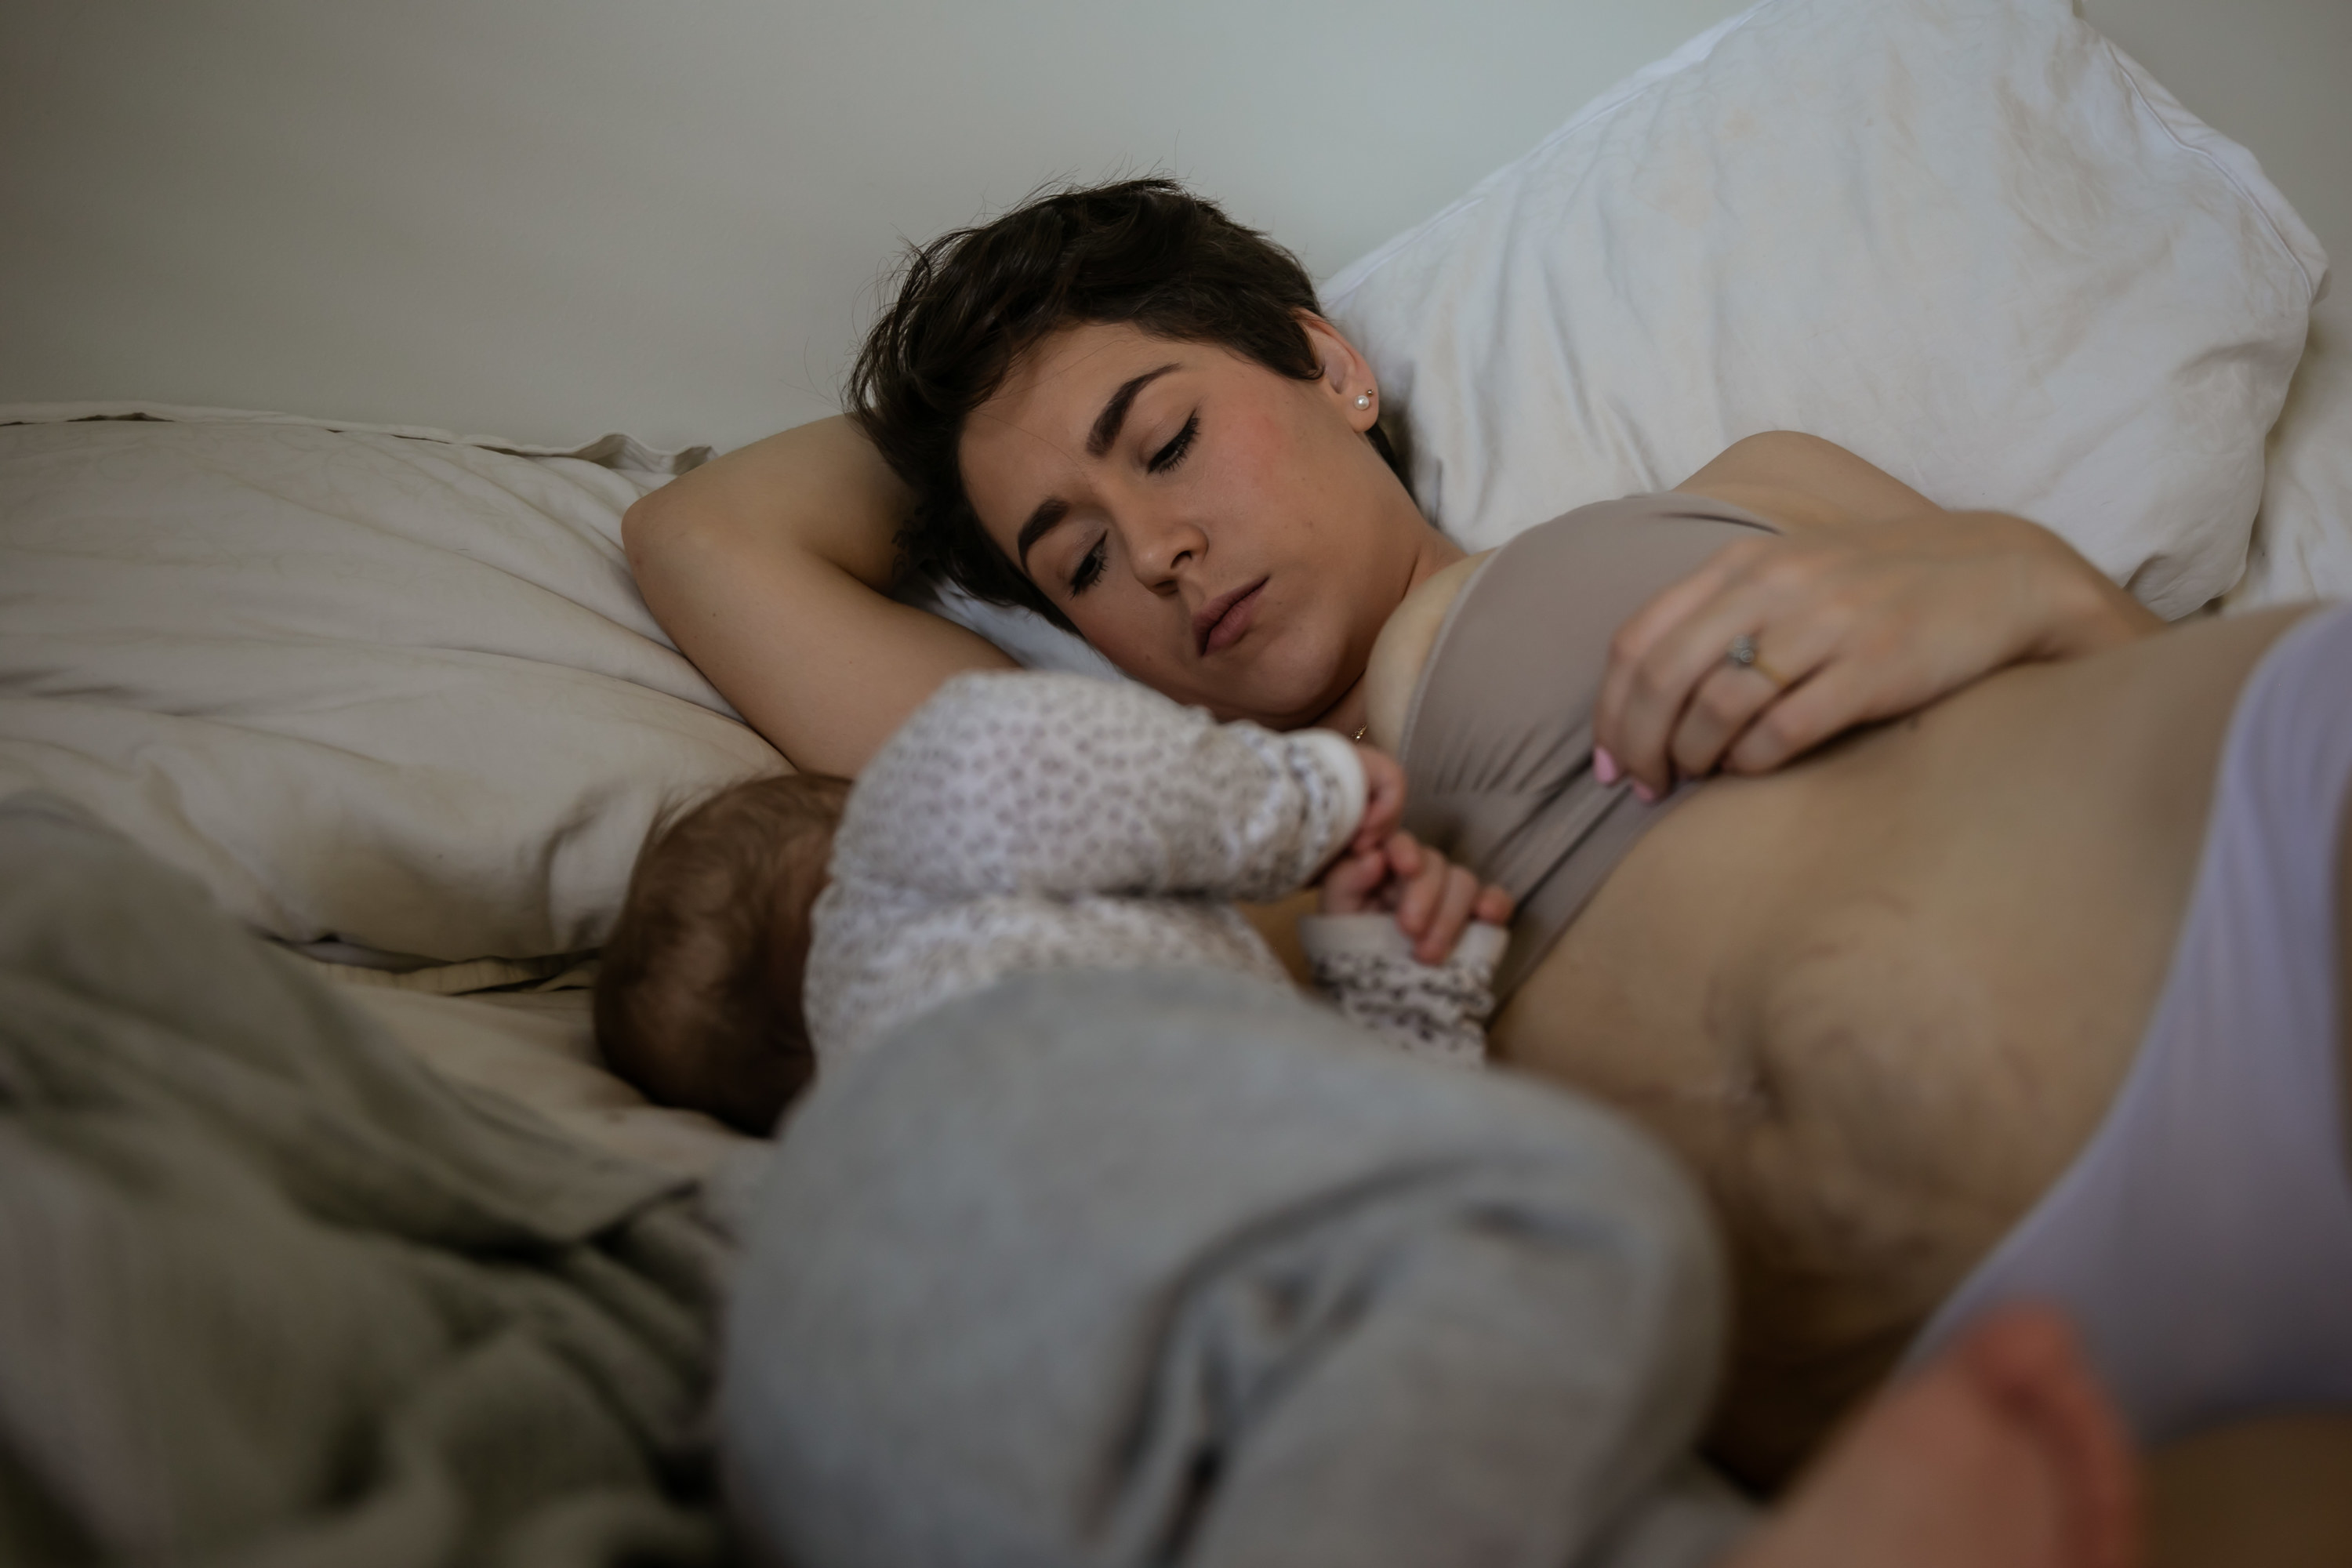 A moment in the postpartum life of a mother at home with her baby boy and toddler girl, she is tired and struggling to breastfeed. She is wearing postpartum briefs and you can clearly see the stretch marks on her belly from being pregnant